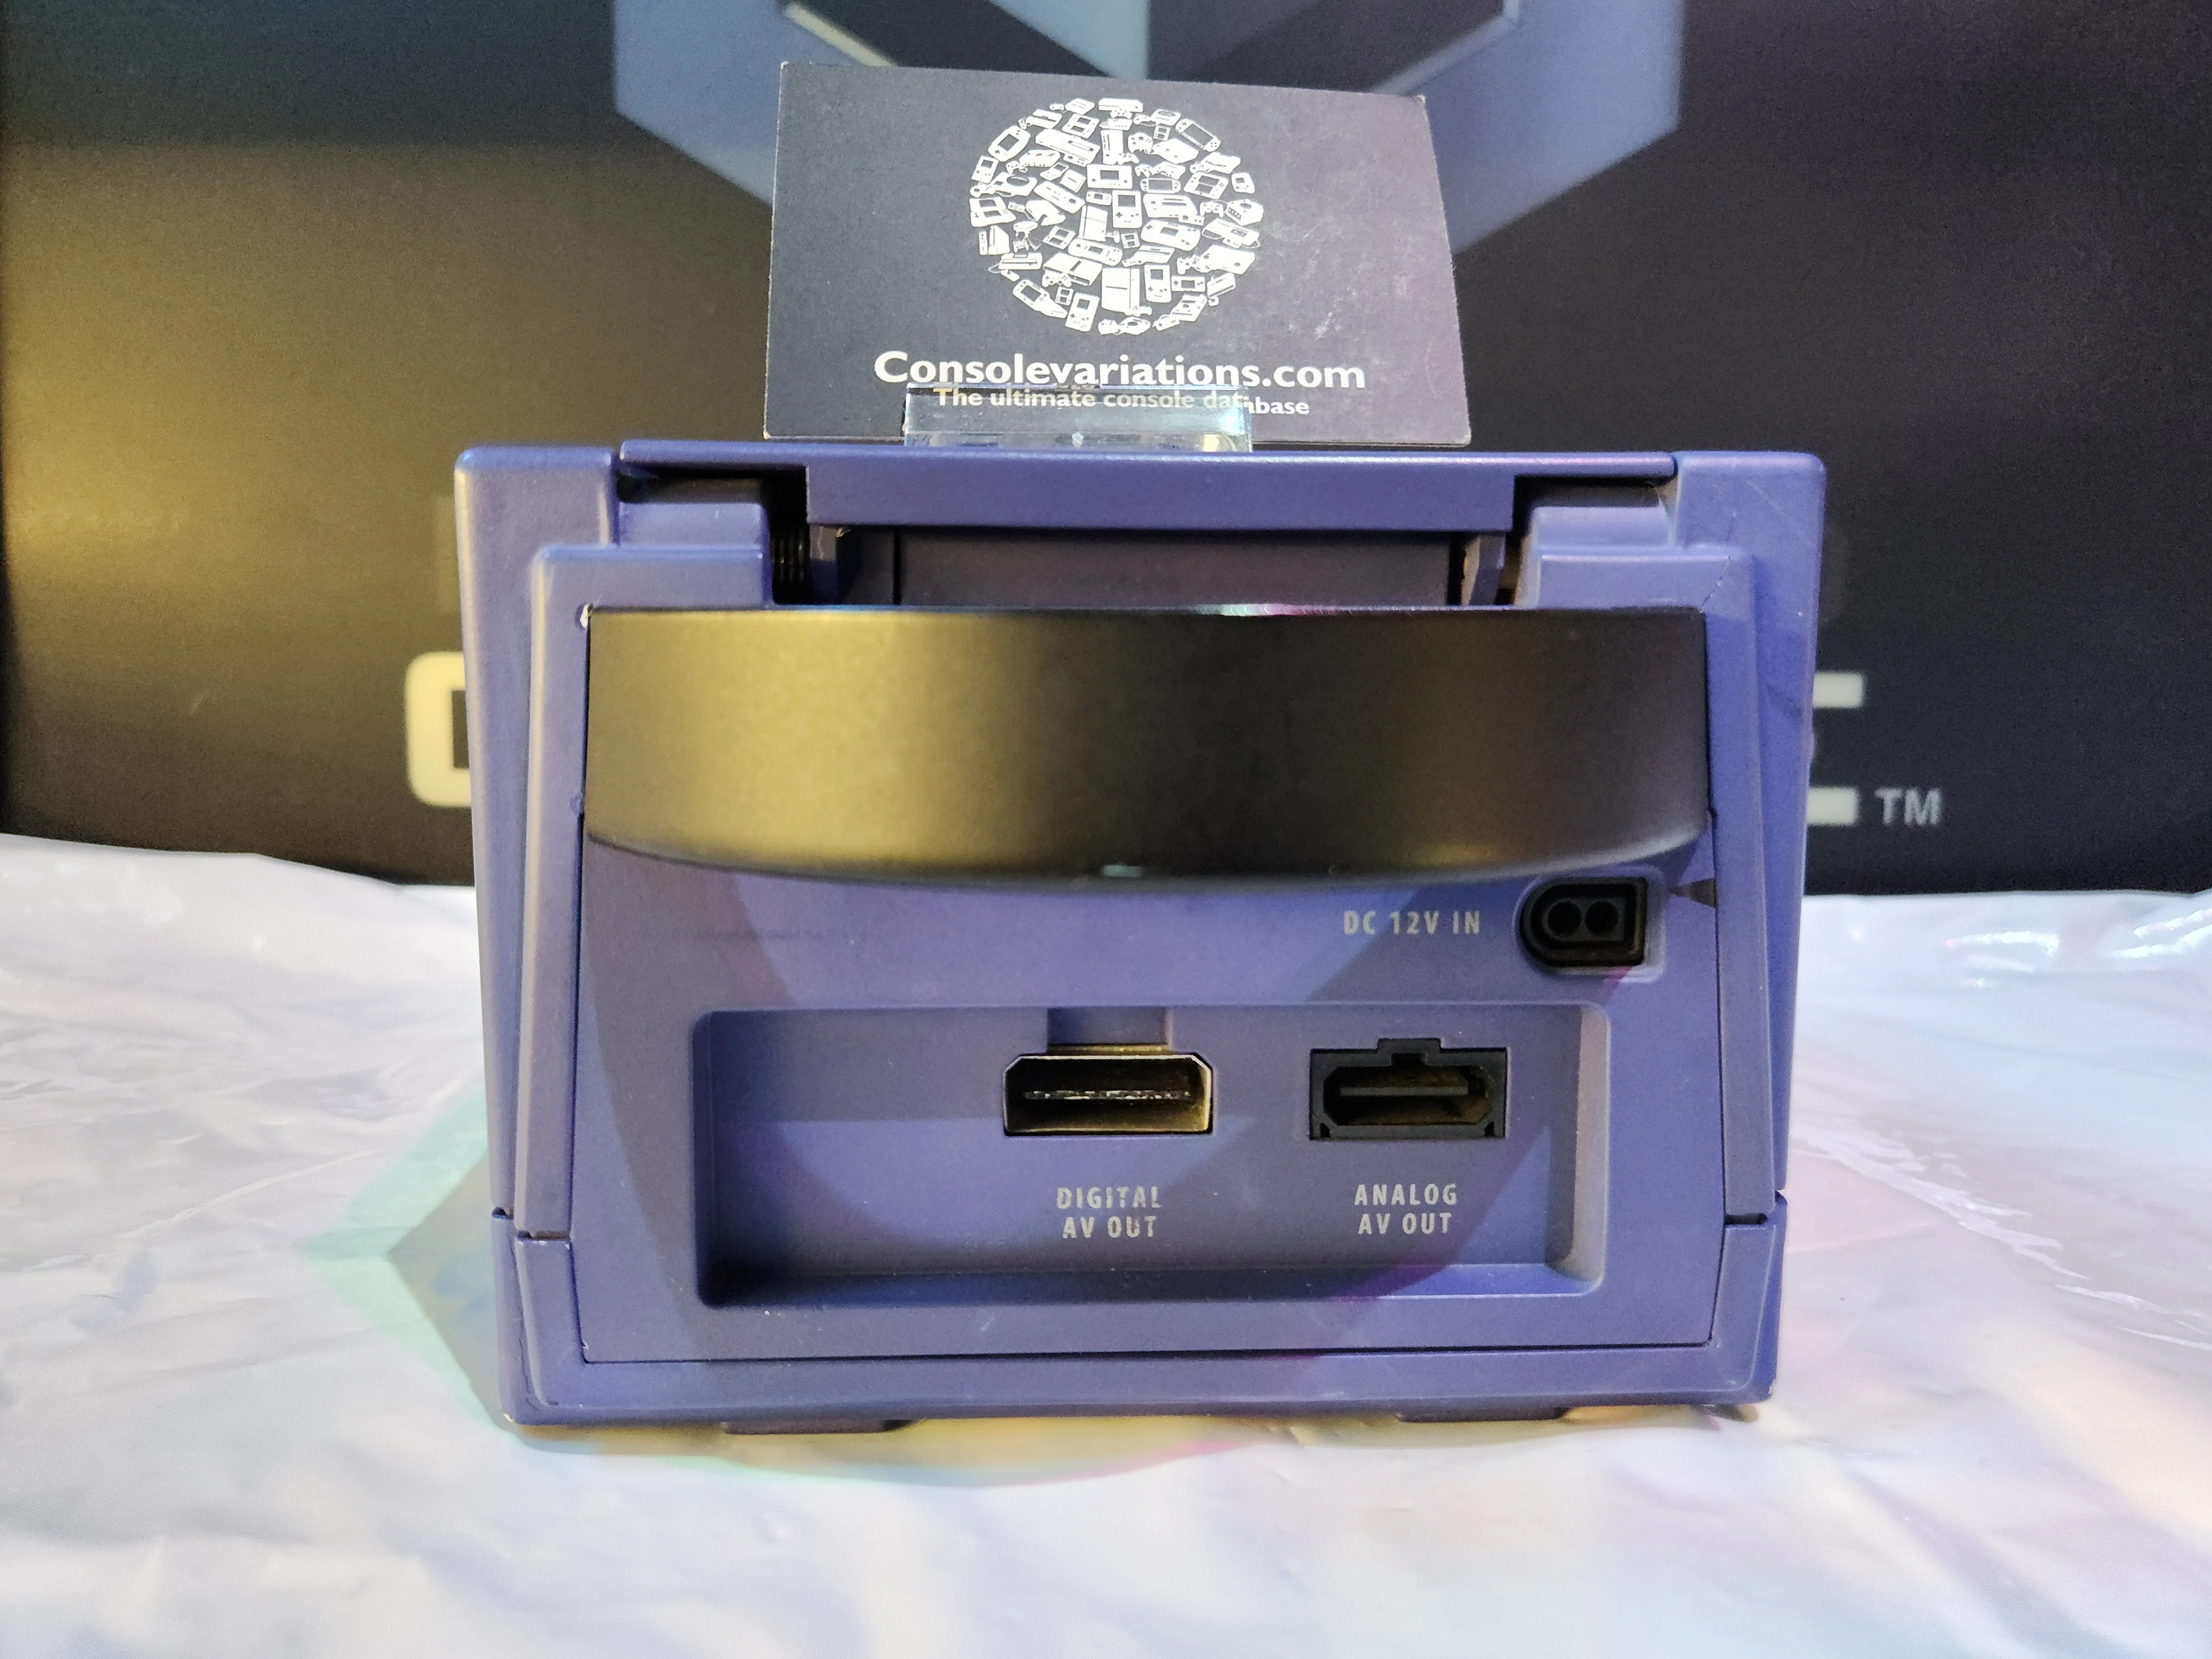 Spaceworld GameCube from the Back